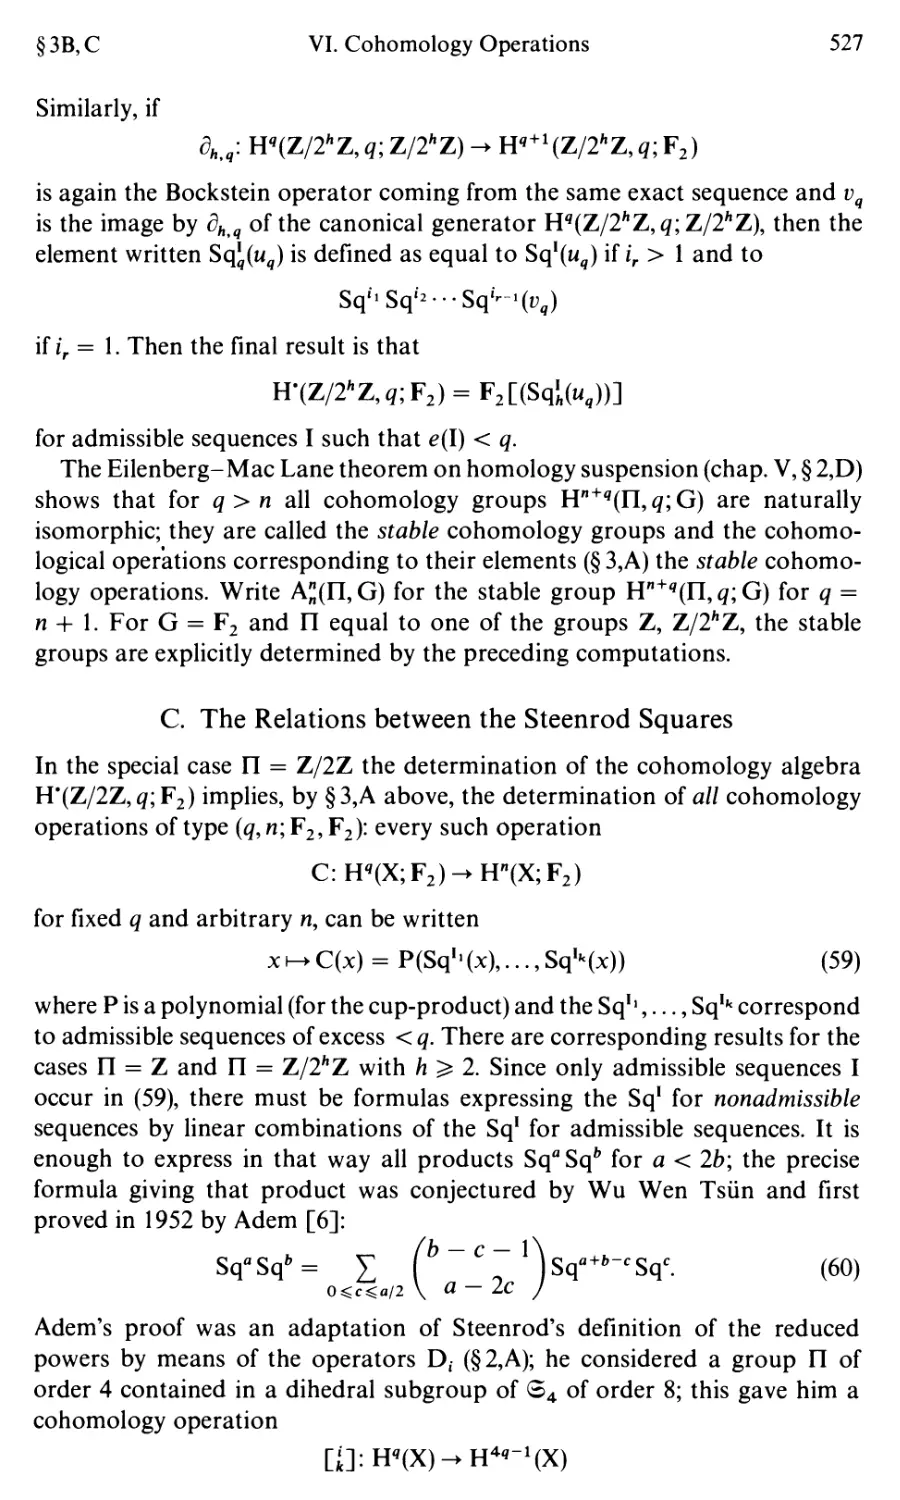 C. The Relations between the Steenrod Squares